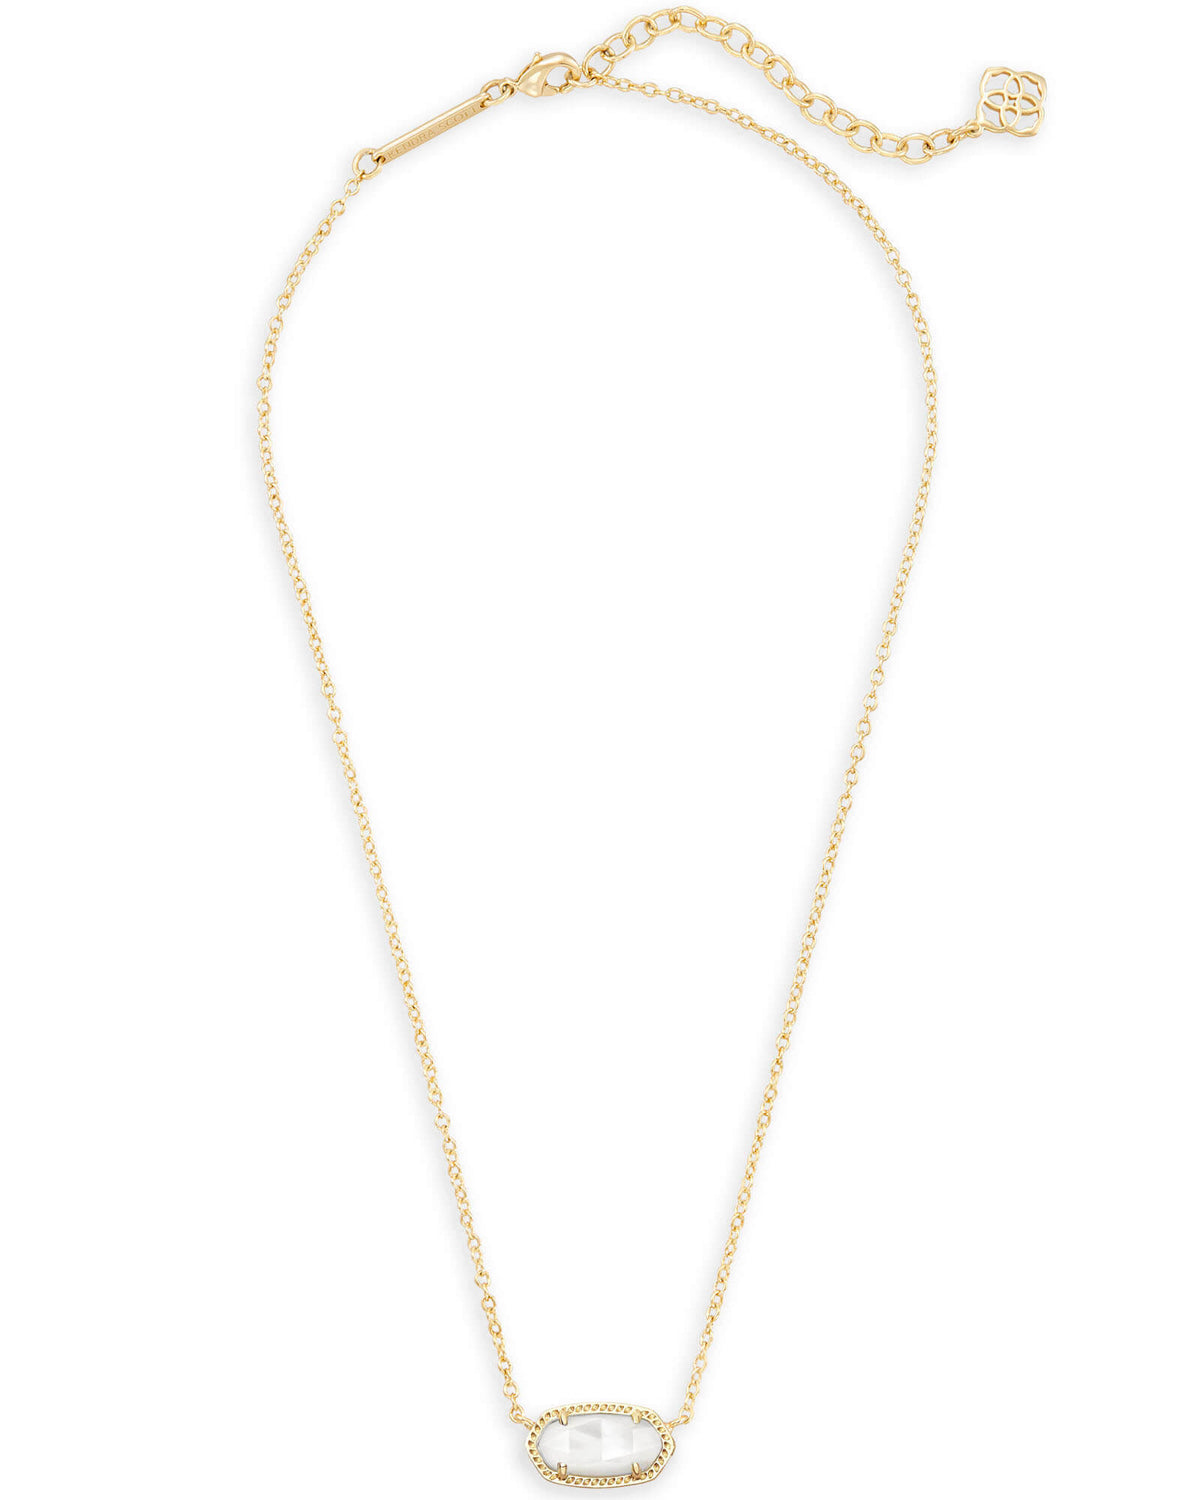 Kendra Scott Elisa Gold Pendant Necklace in Ivory Pearl